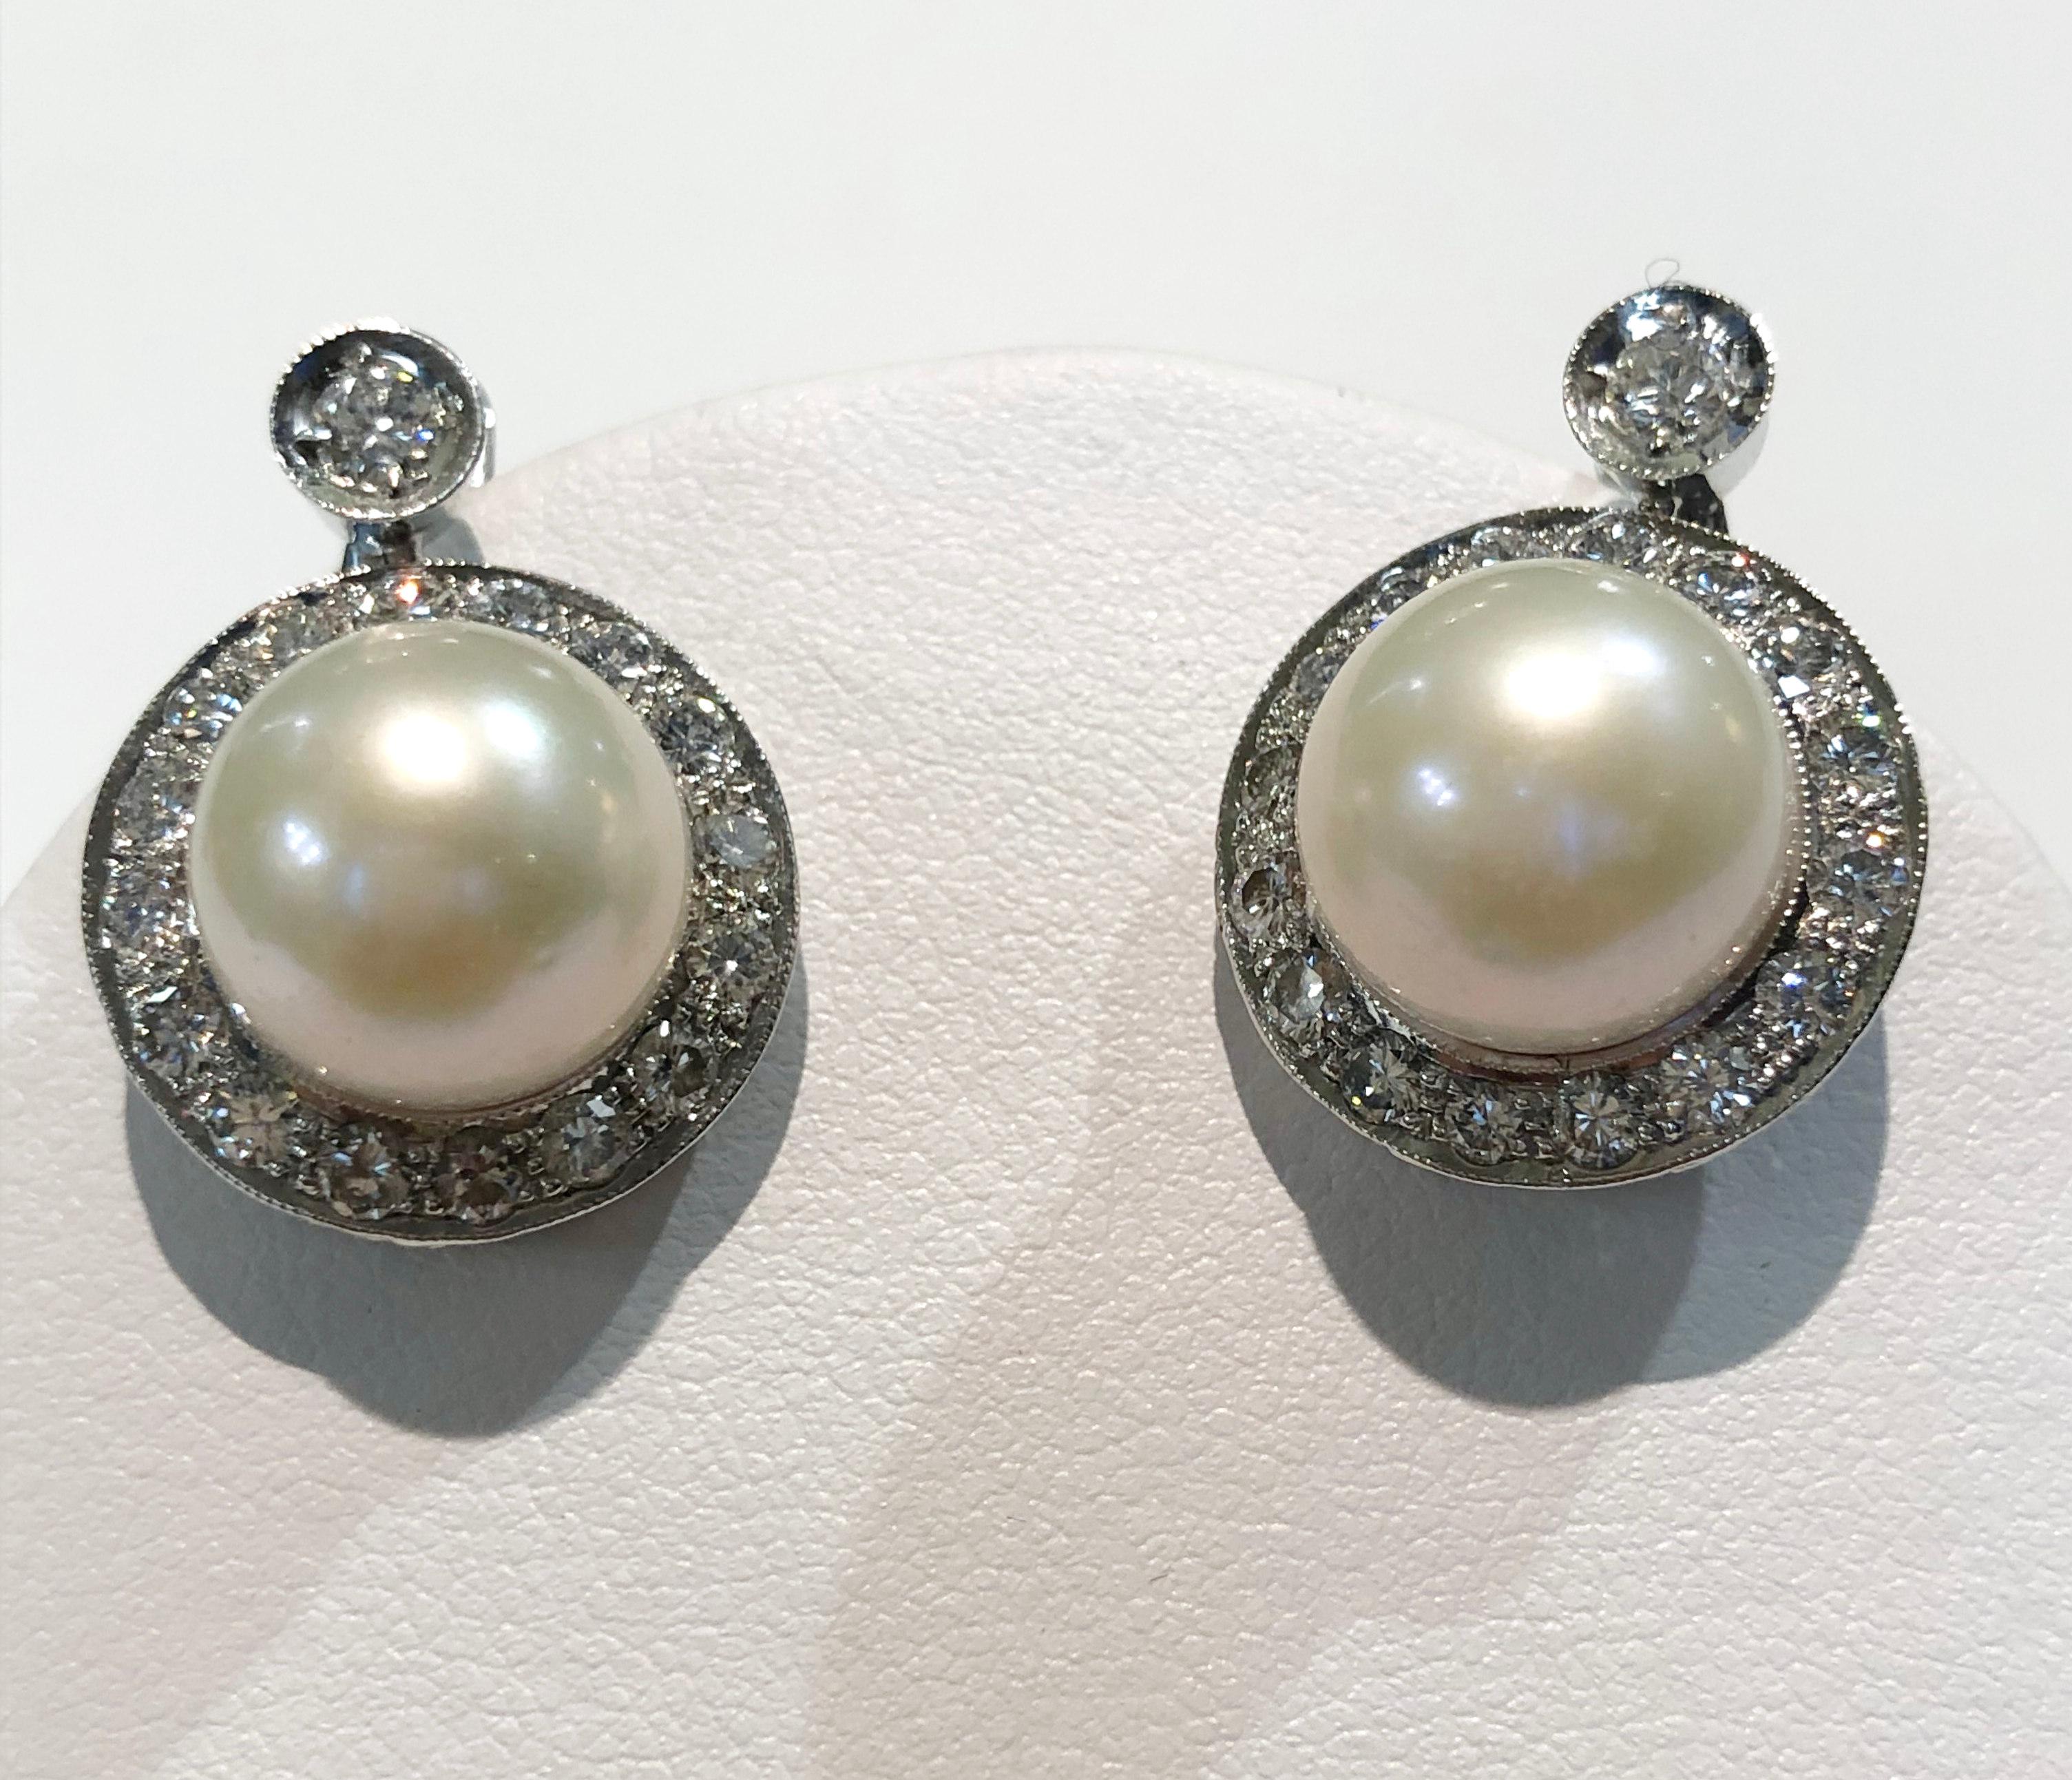 Pair of vintage earrings with 18 karat white gold, 12mm pearls and brilliant diamonds for a total of 2.2 karats on each earring, Italy 1970s 
Length 2.5 cm